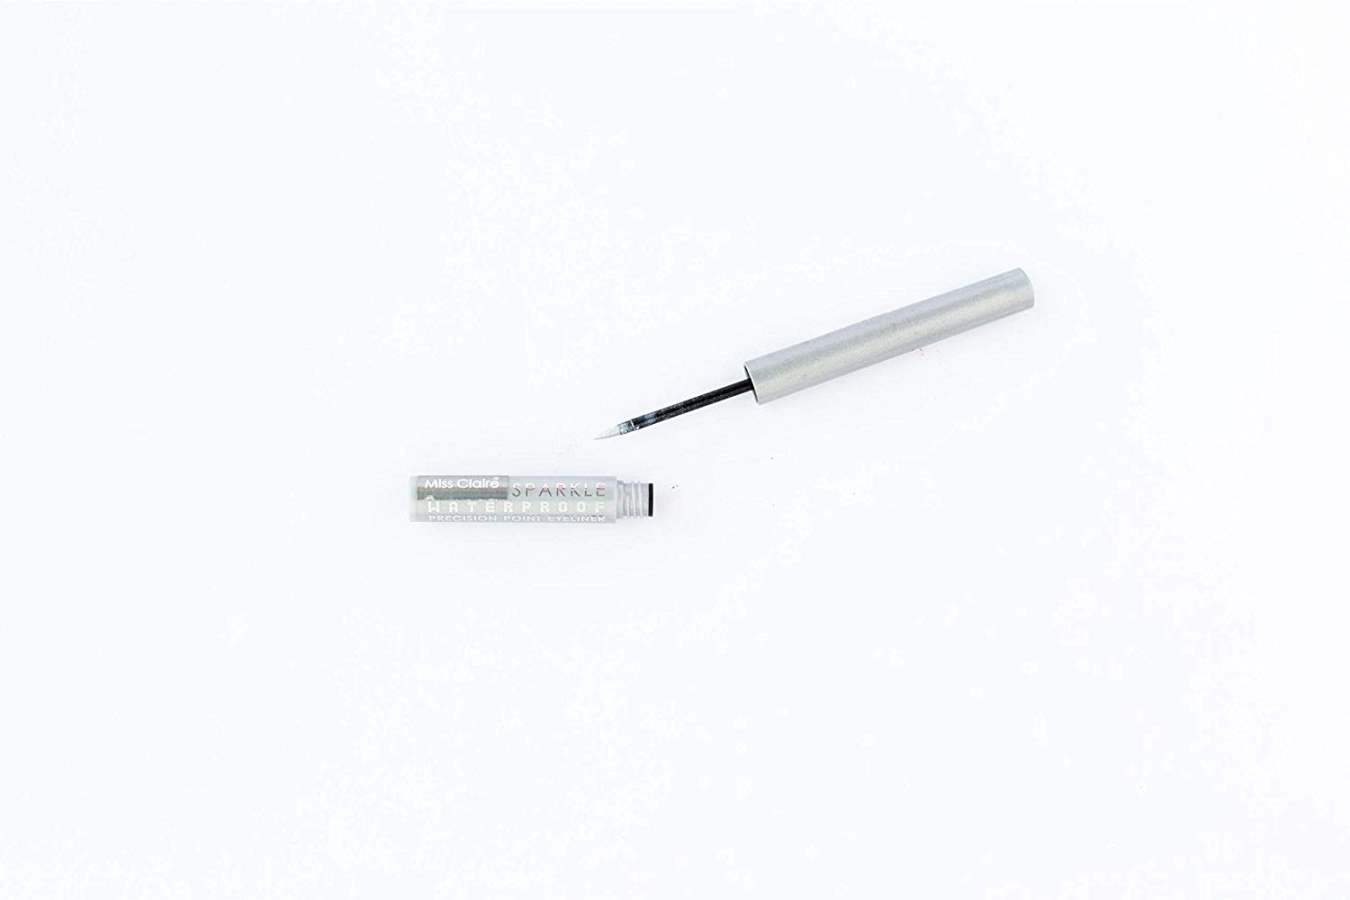 Buy Miss Claire Parkle Waterproof Precision Point Eyeliner, Silver online usa [ USA ] 